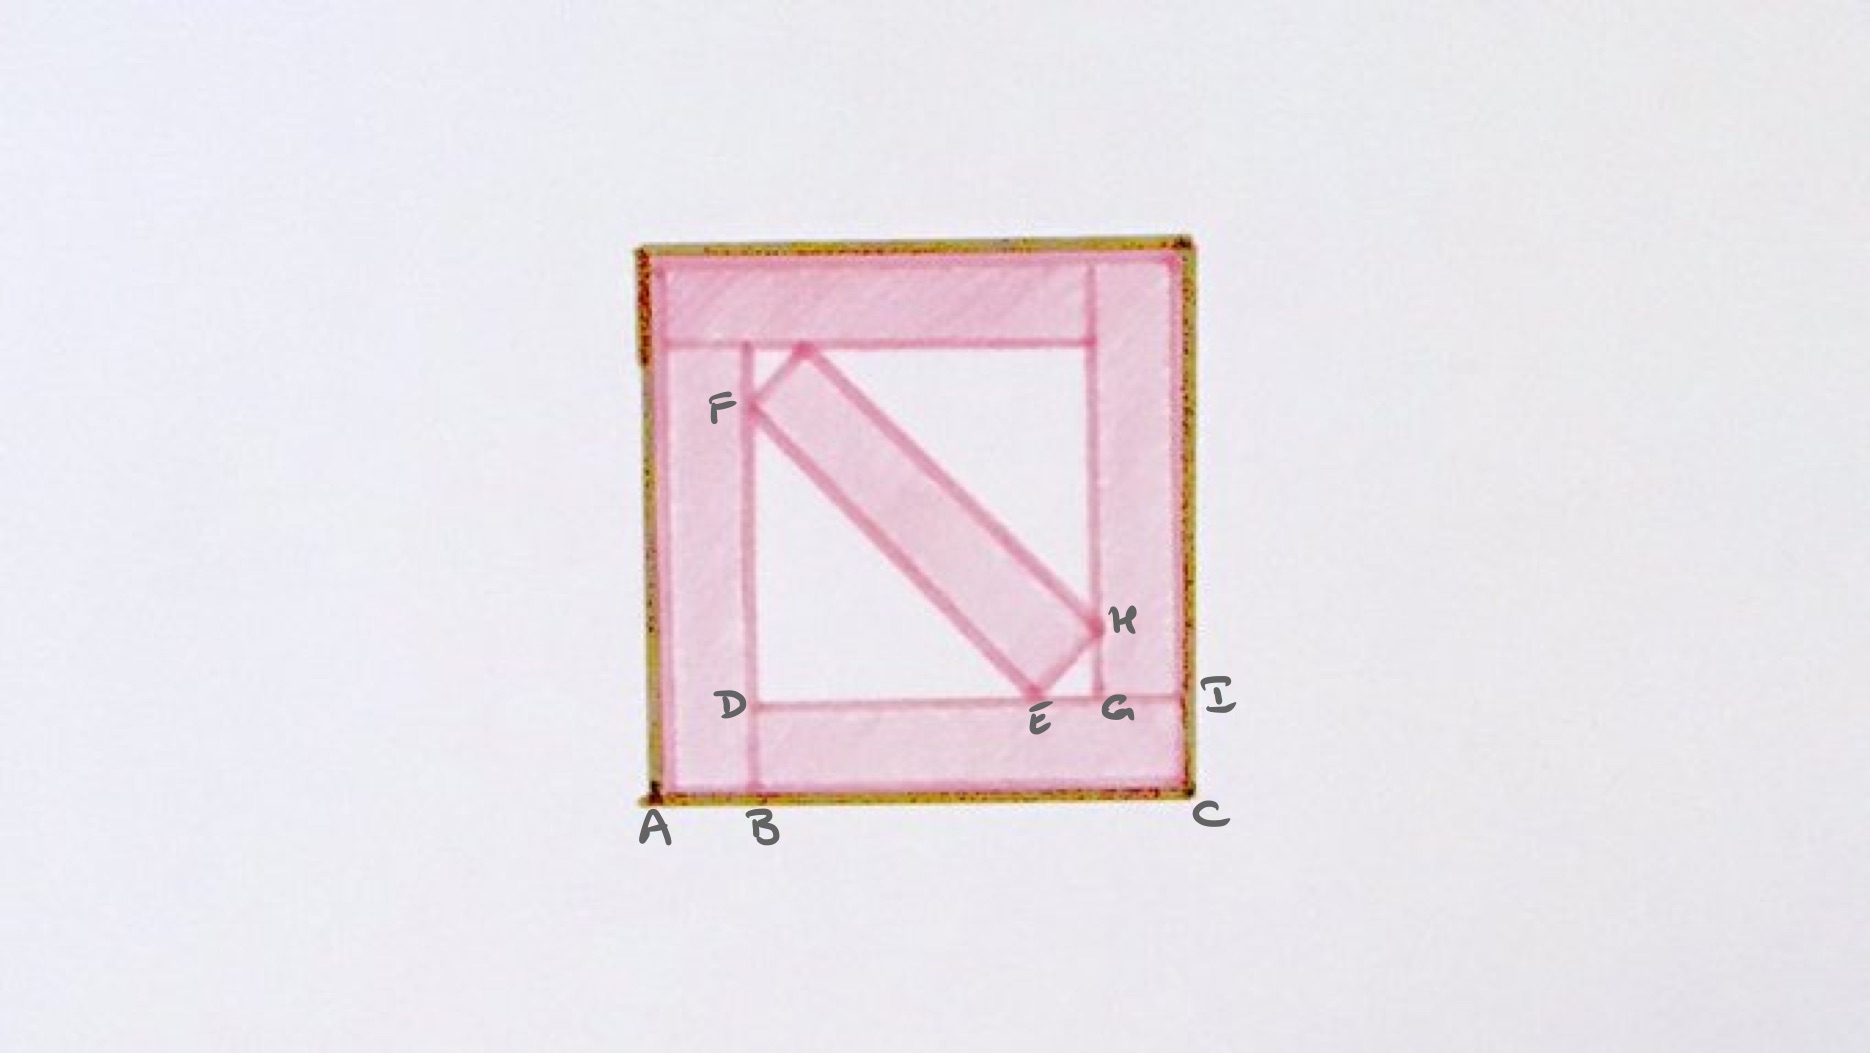 Five rectangles in a square labelled